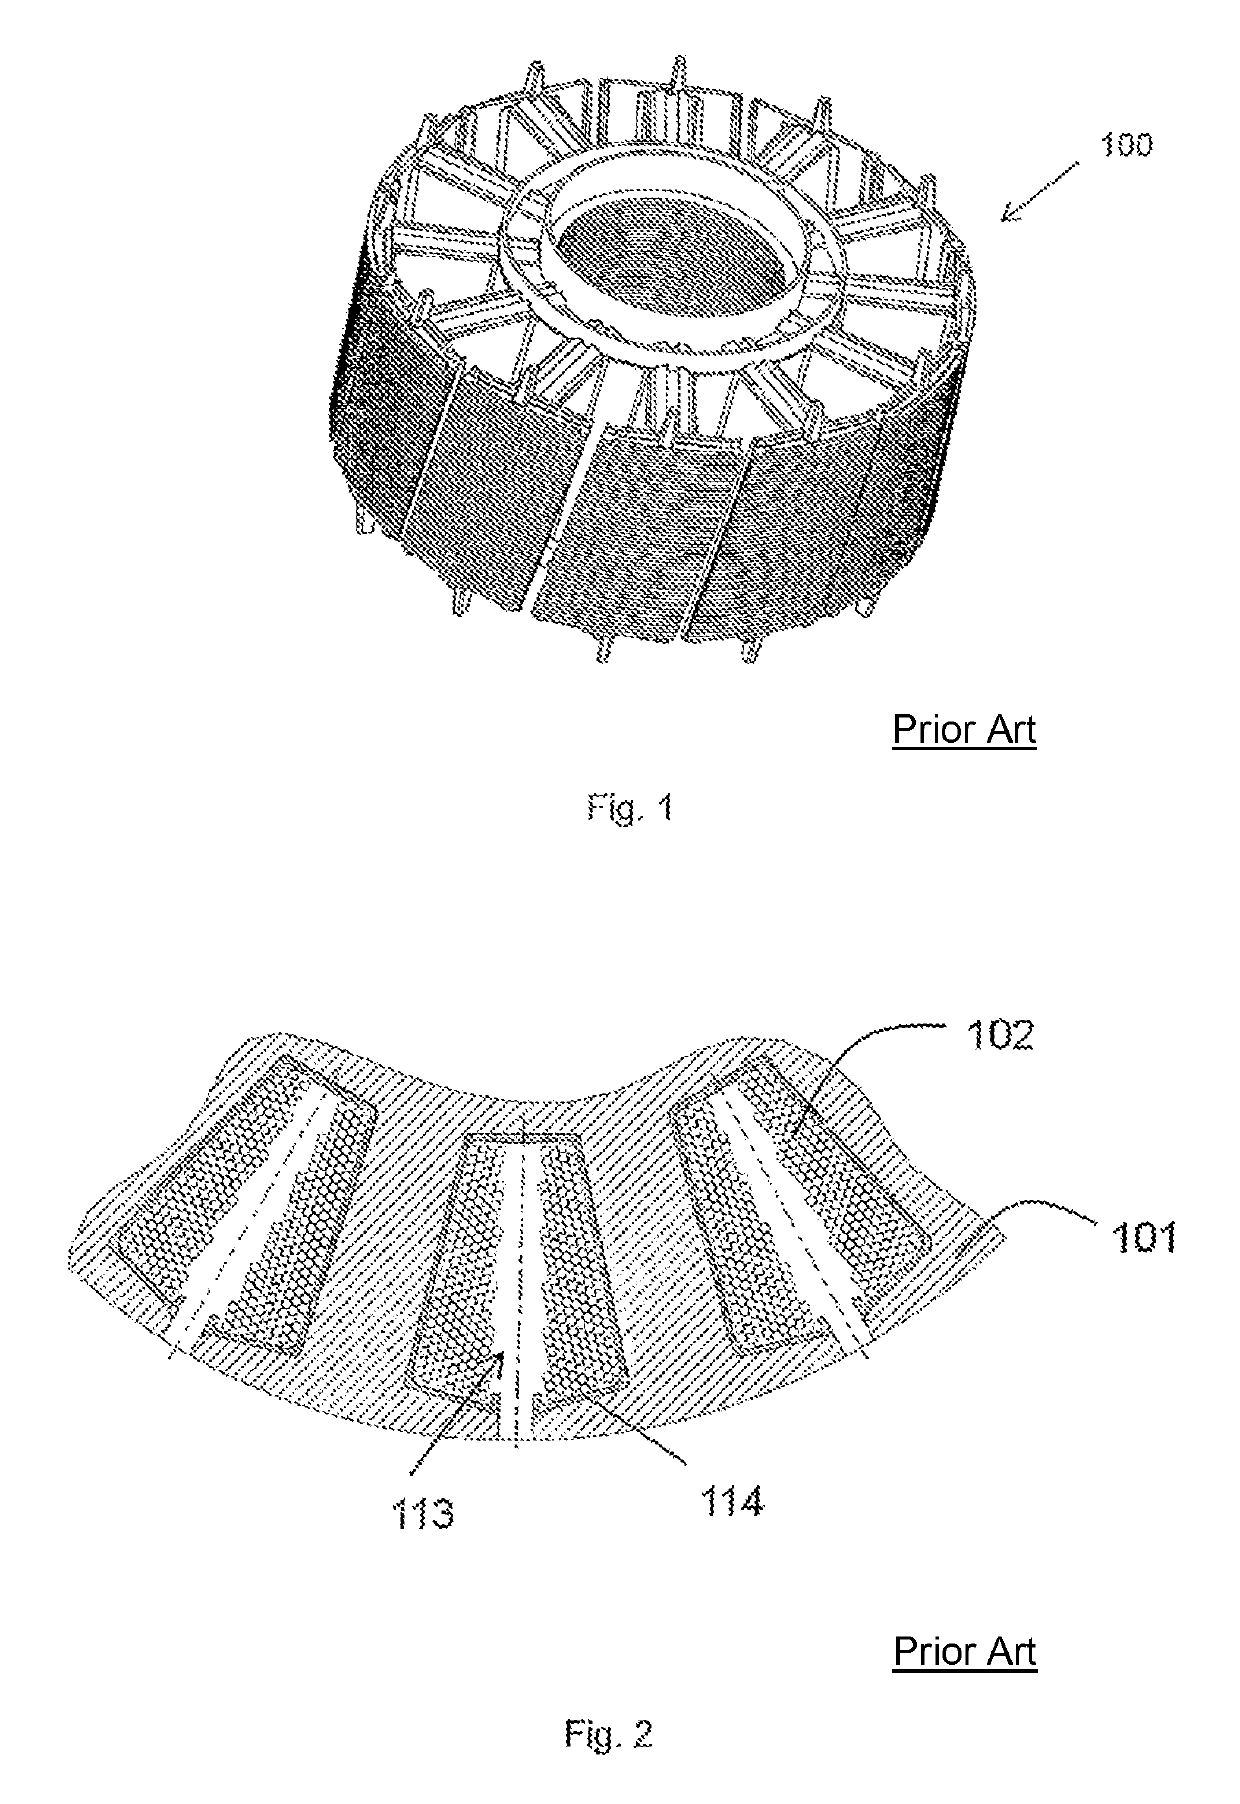 Stator having adapted tooth geometry with teeth having circumferential projections